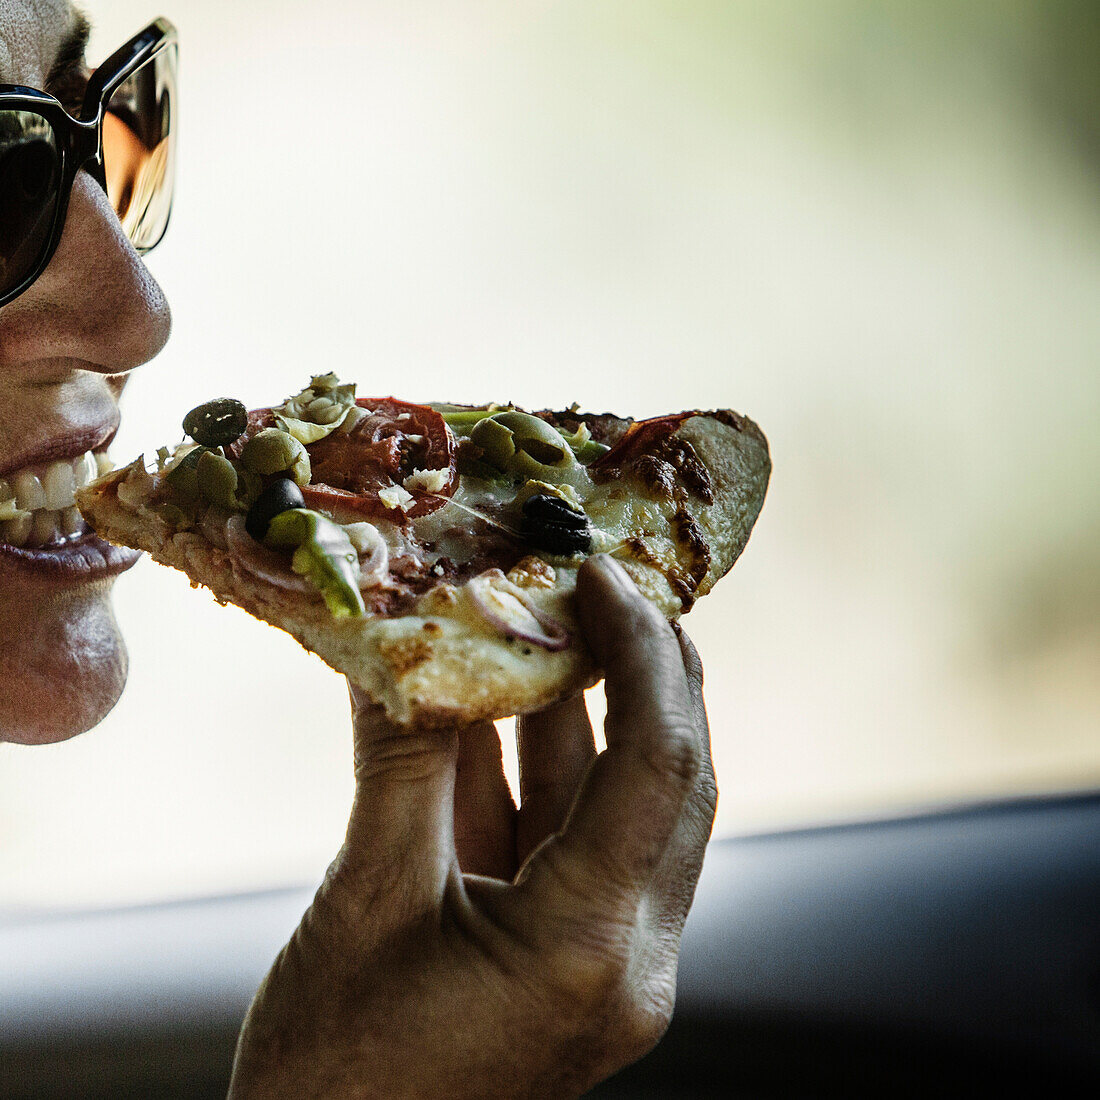 Close up of a woman taking a bite out of a fresh slice of pizza.